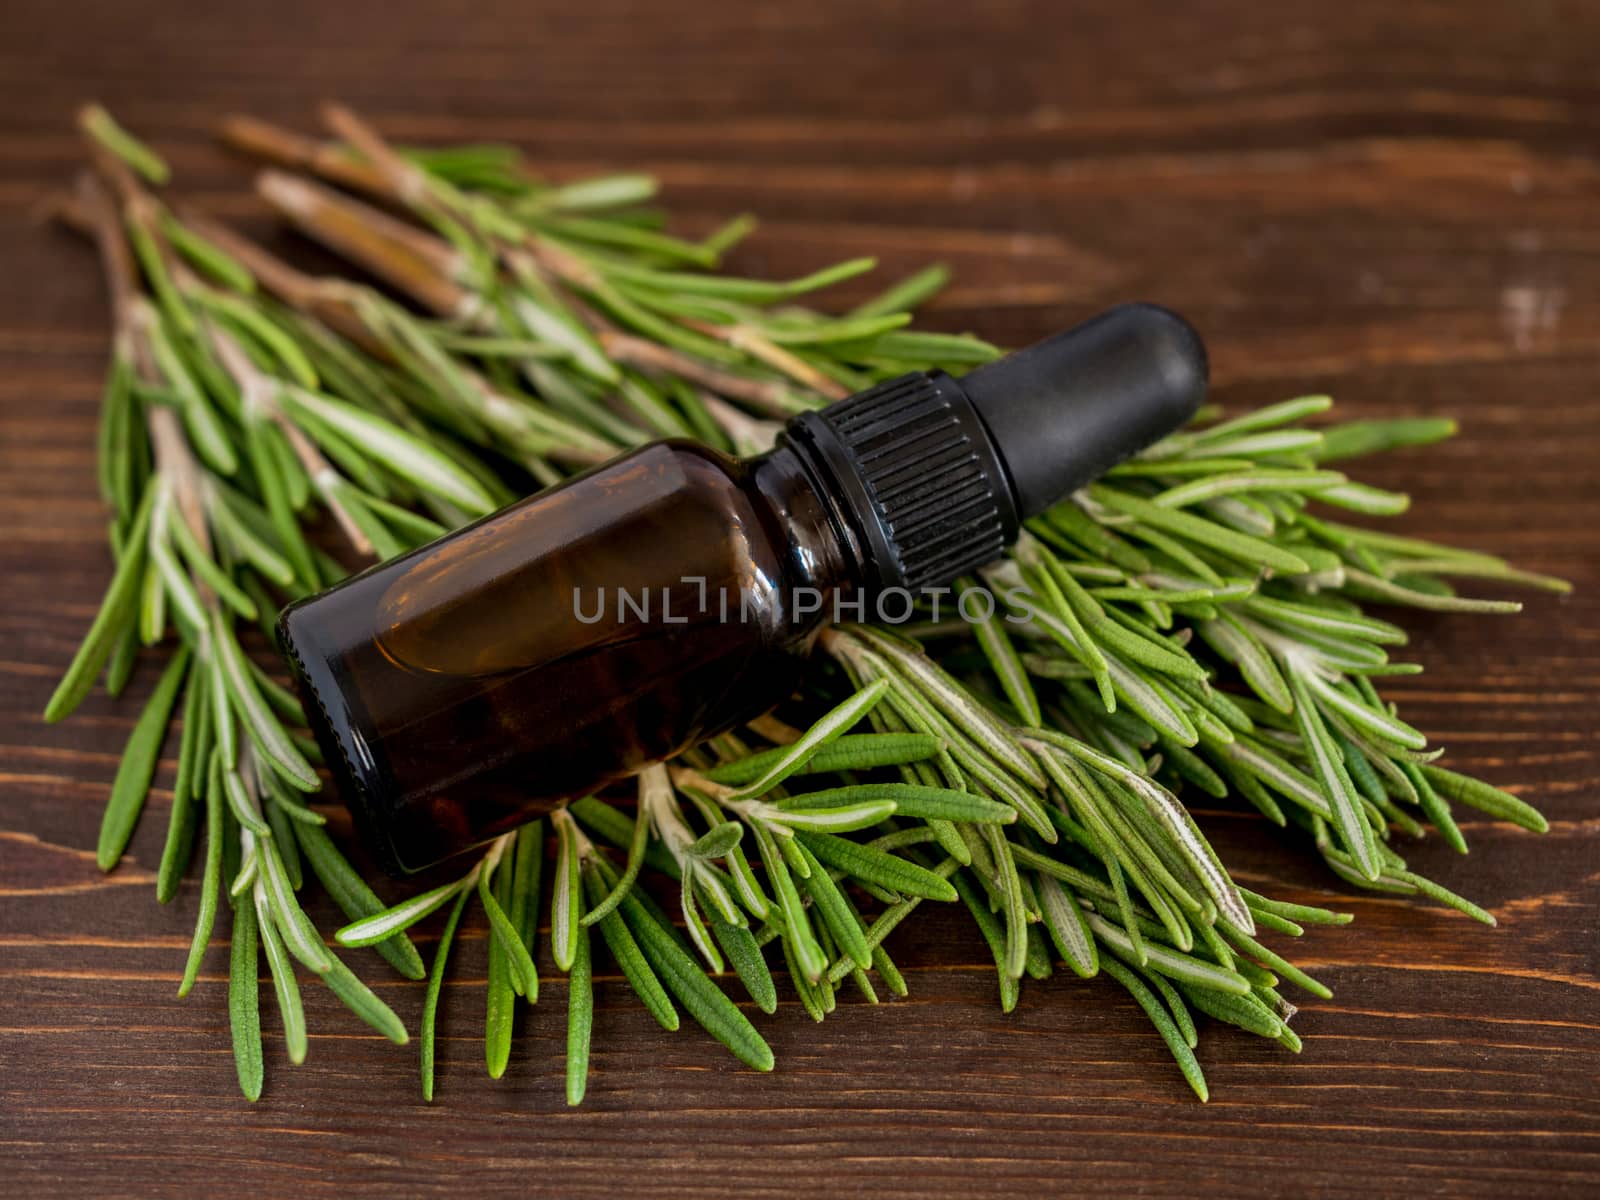 Rosemary essential oil in dark glass bottle and fresh rosemary on dark wooden background. Top view or flat lay